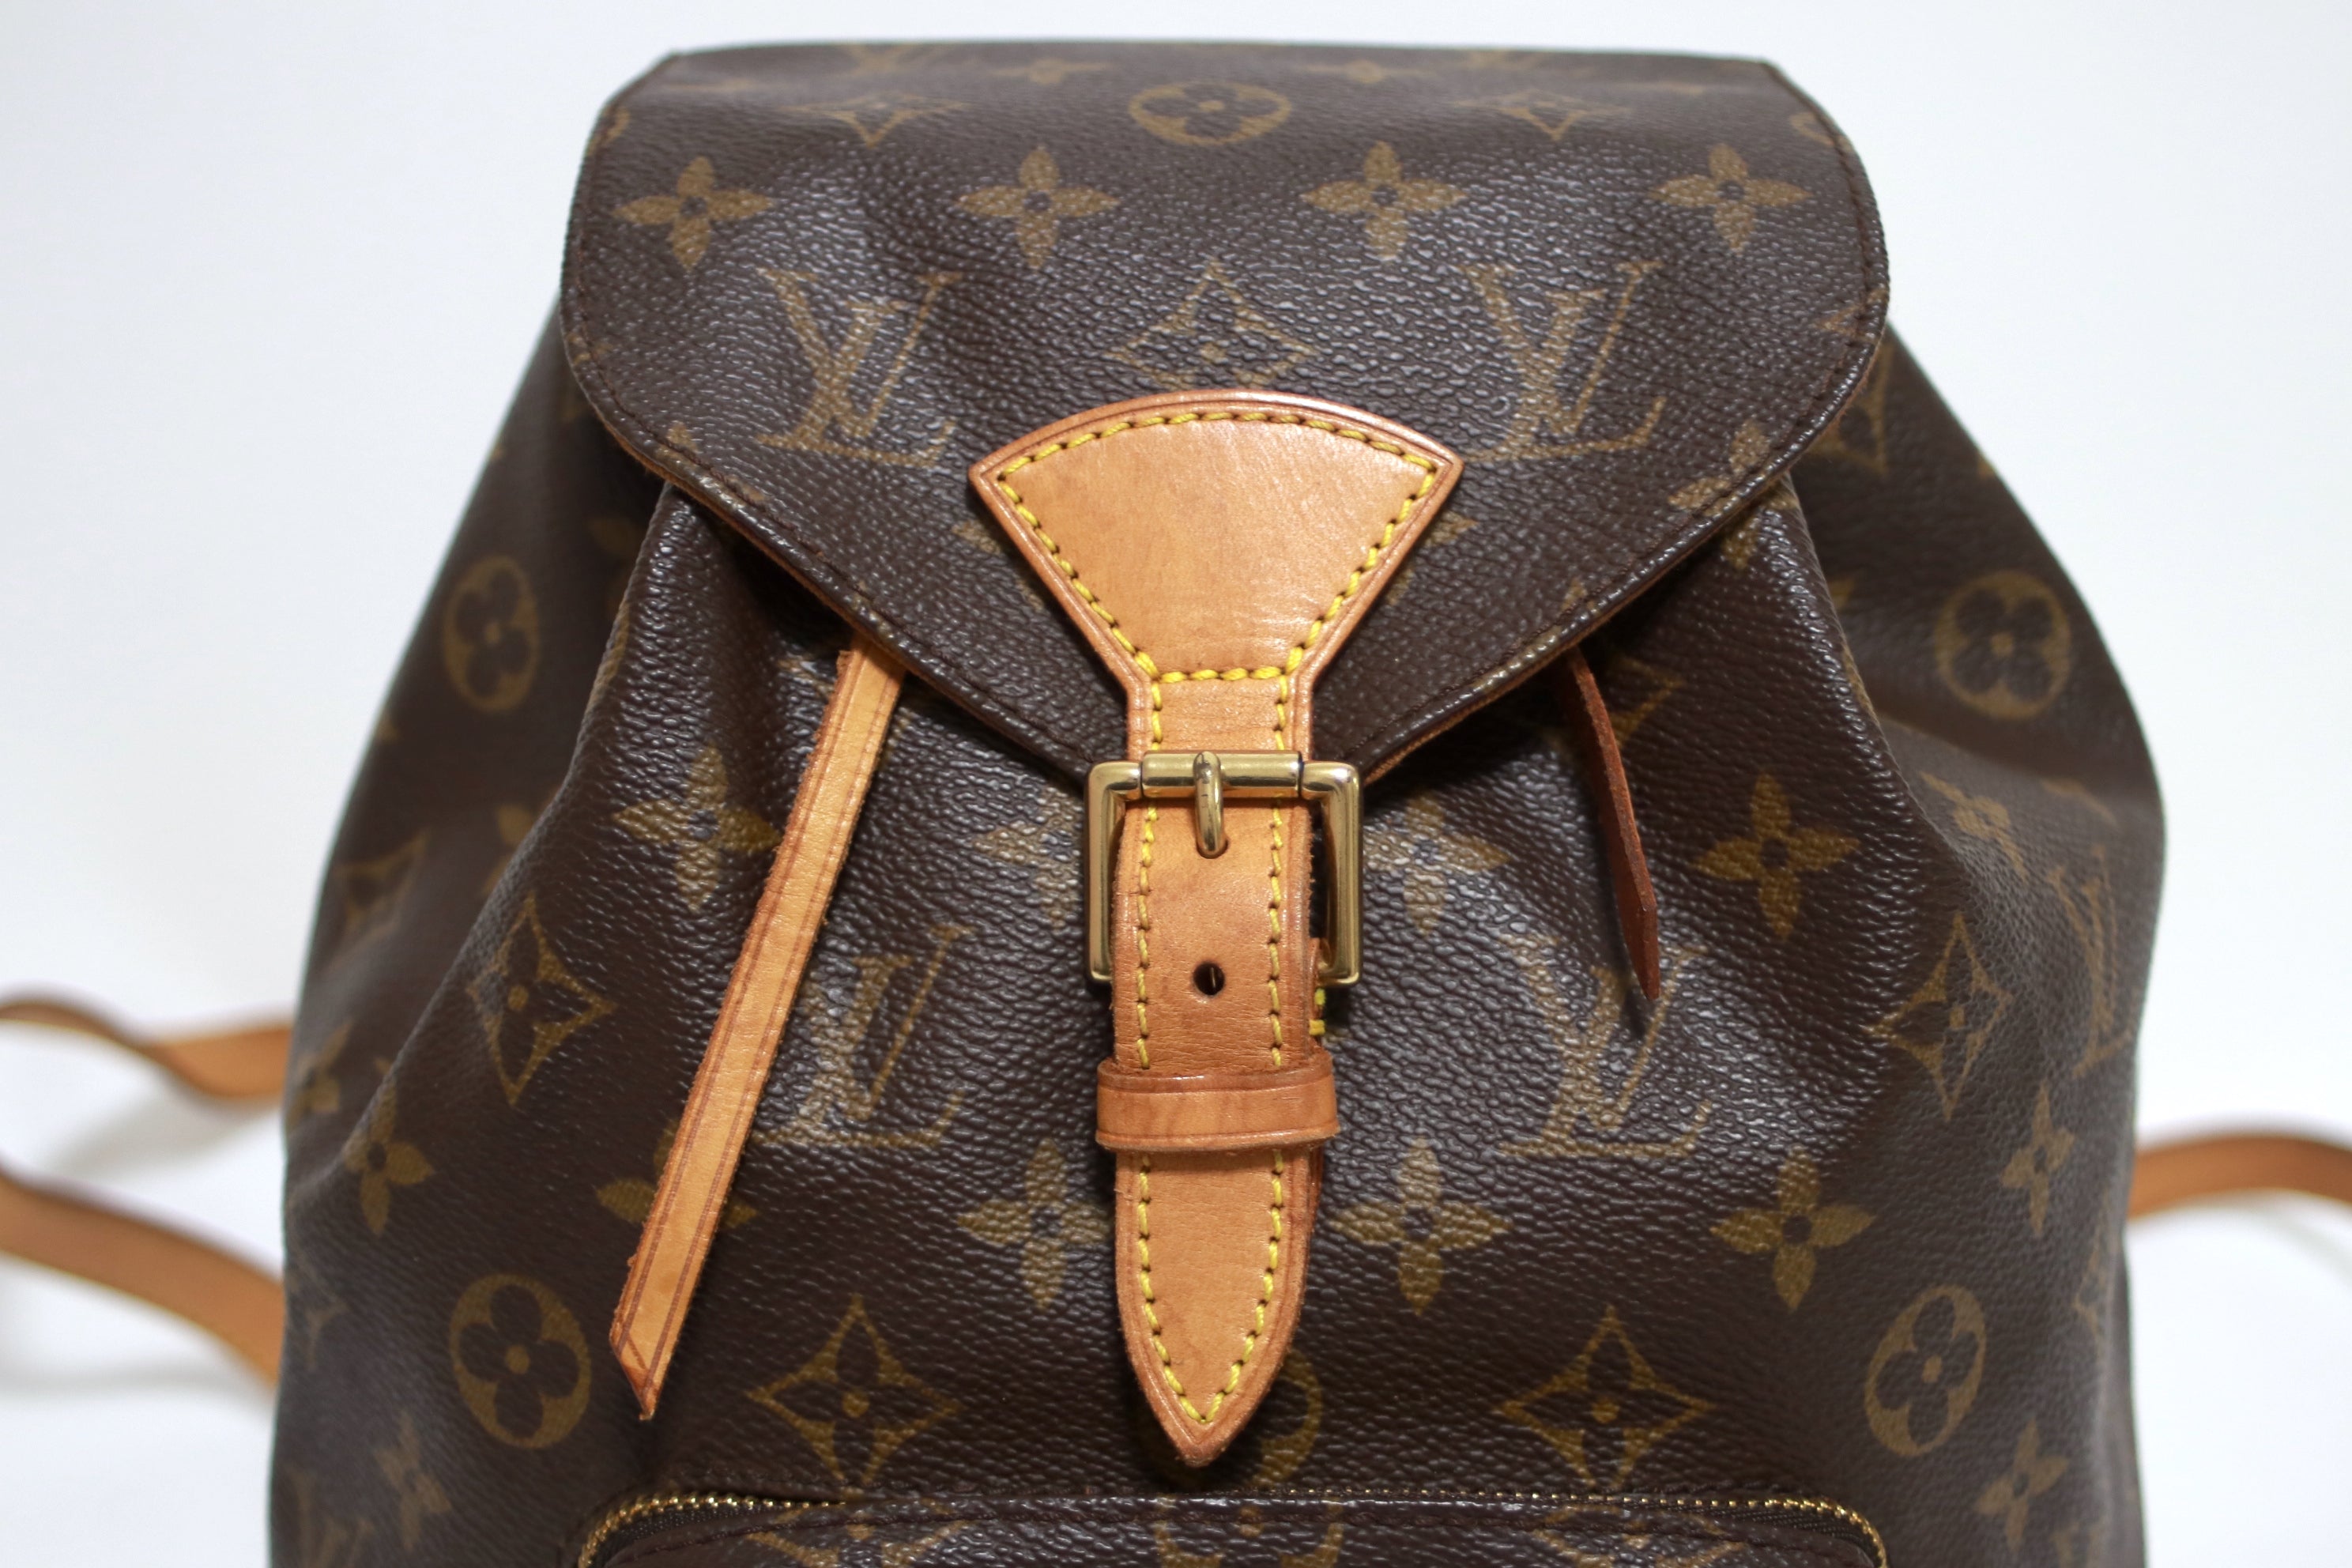 Louis Vuitton Montsouris MM Backpack Used (7515)